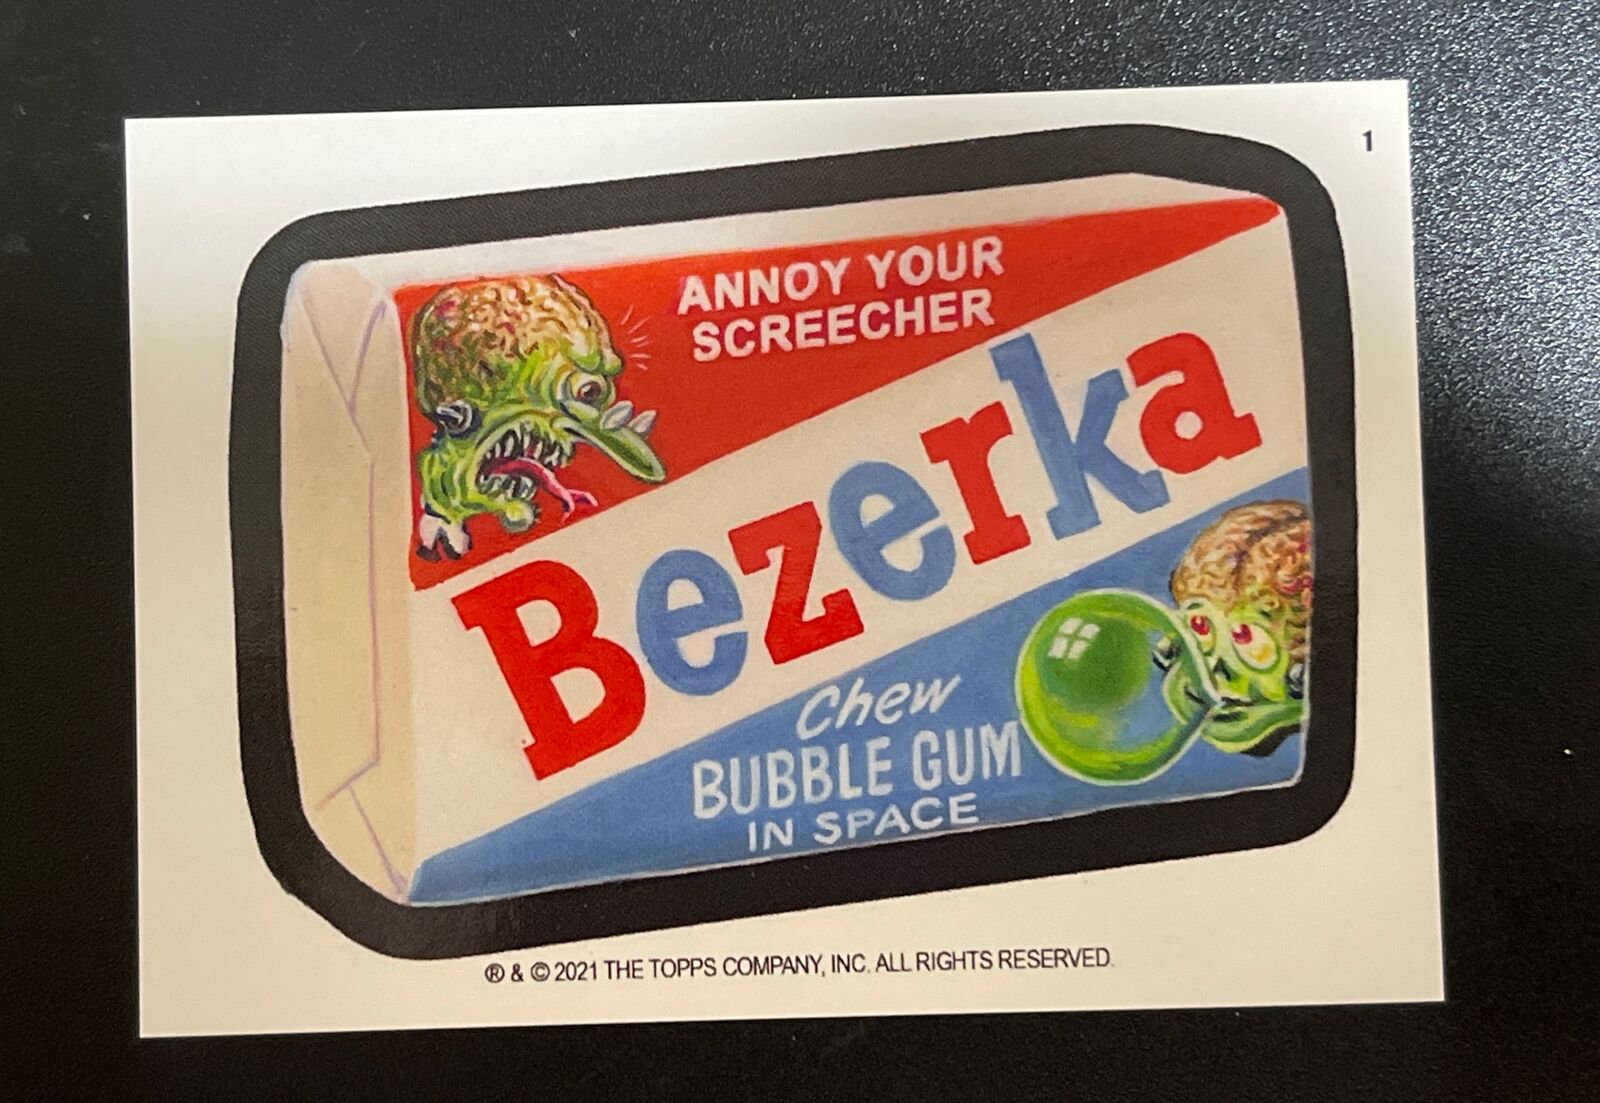 2021 Topps Wacky Attacky Packages Series 5 Bezerka Coupon Back Variant #1